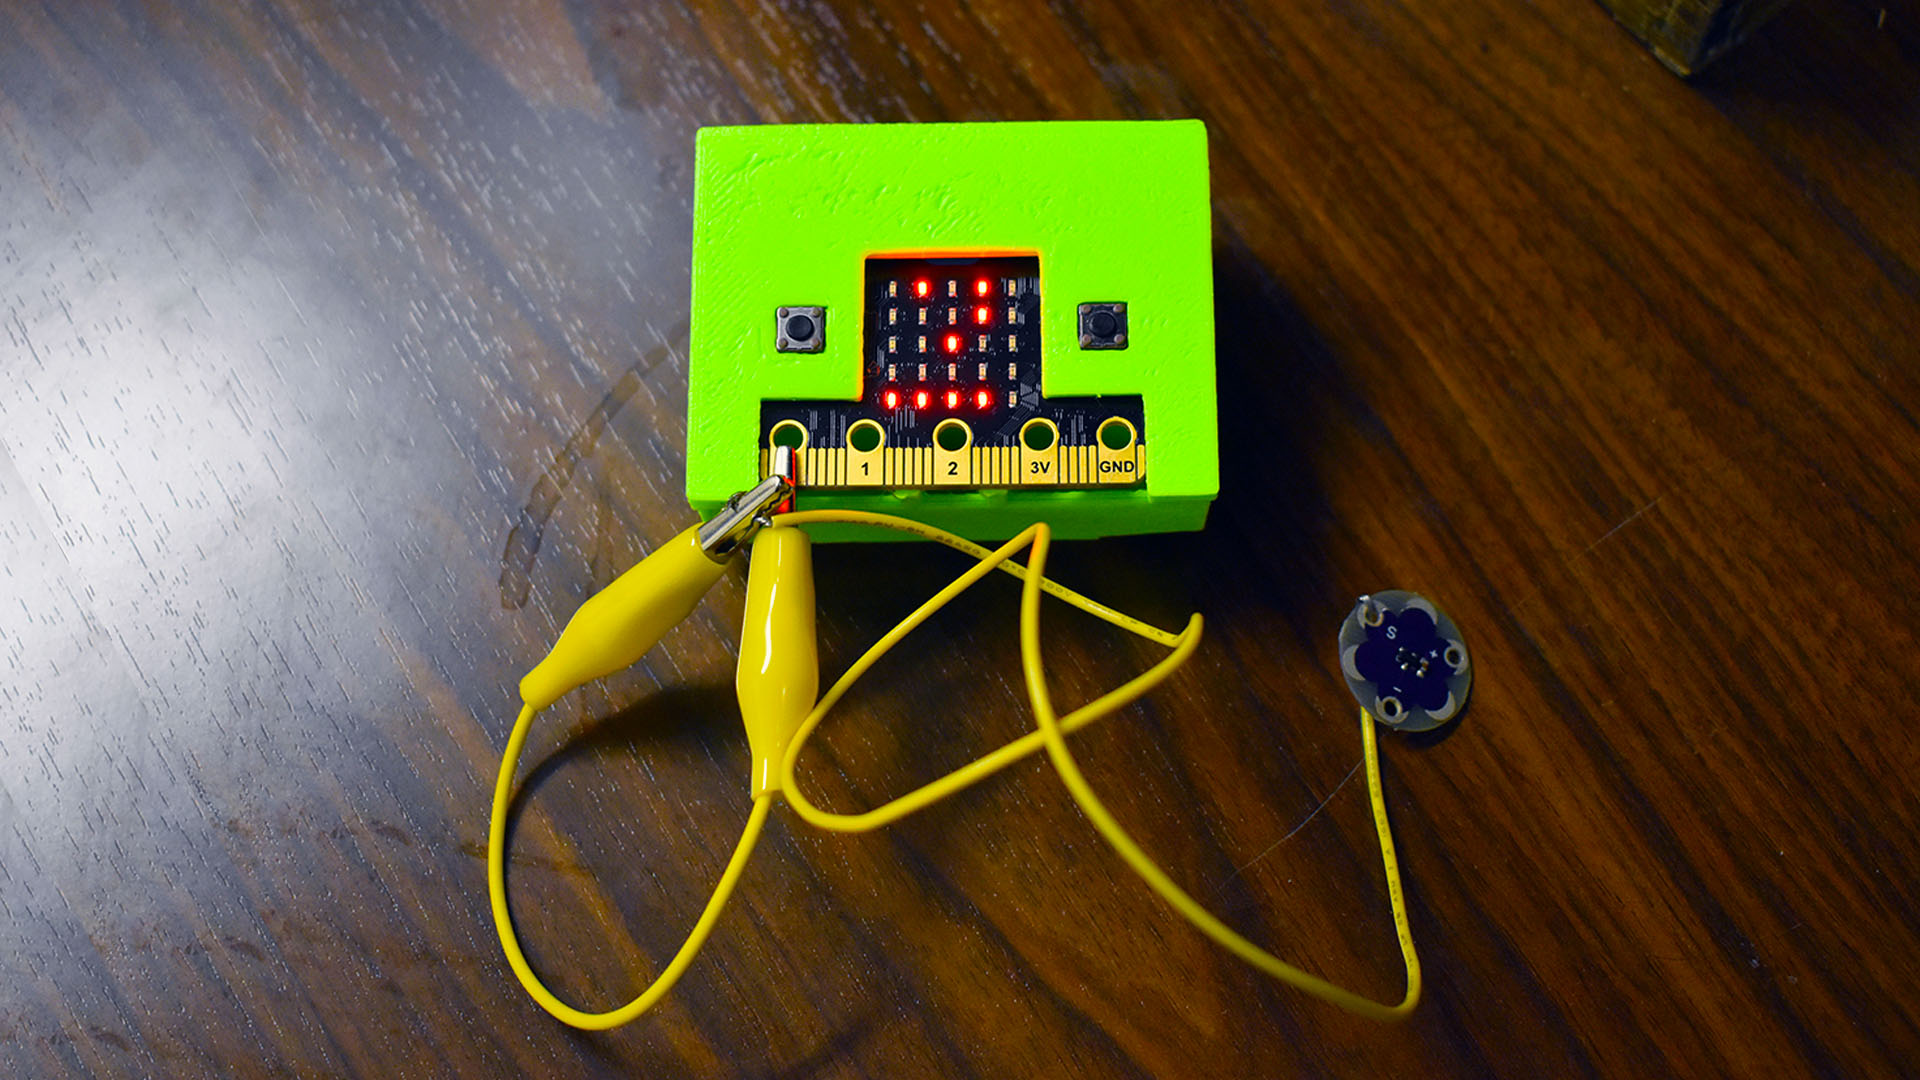 The Microbit